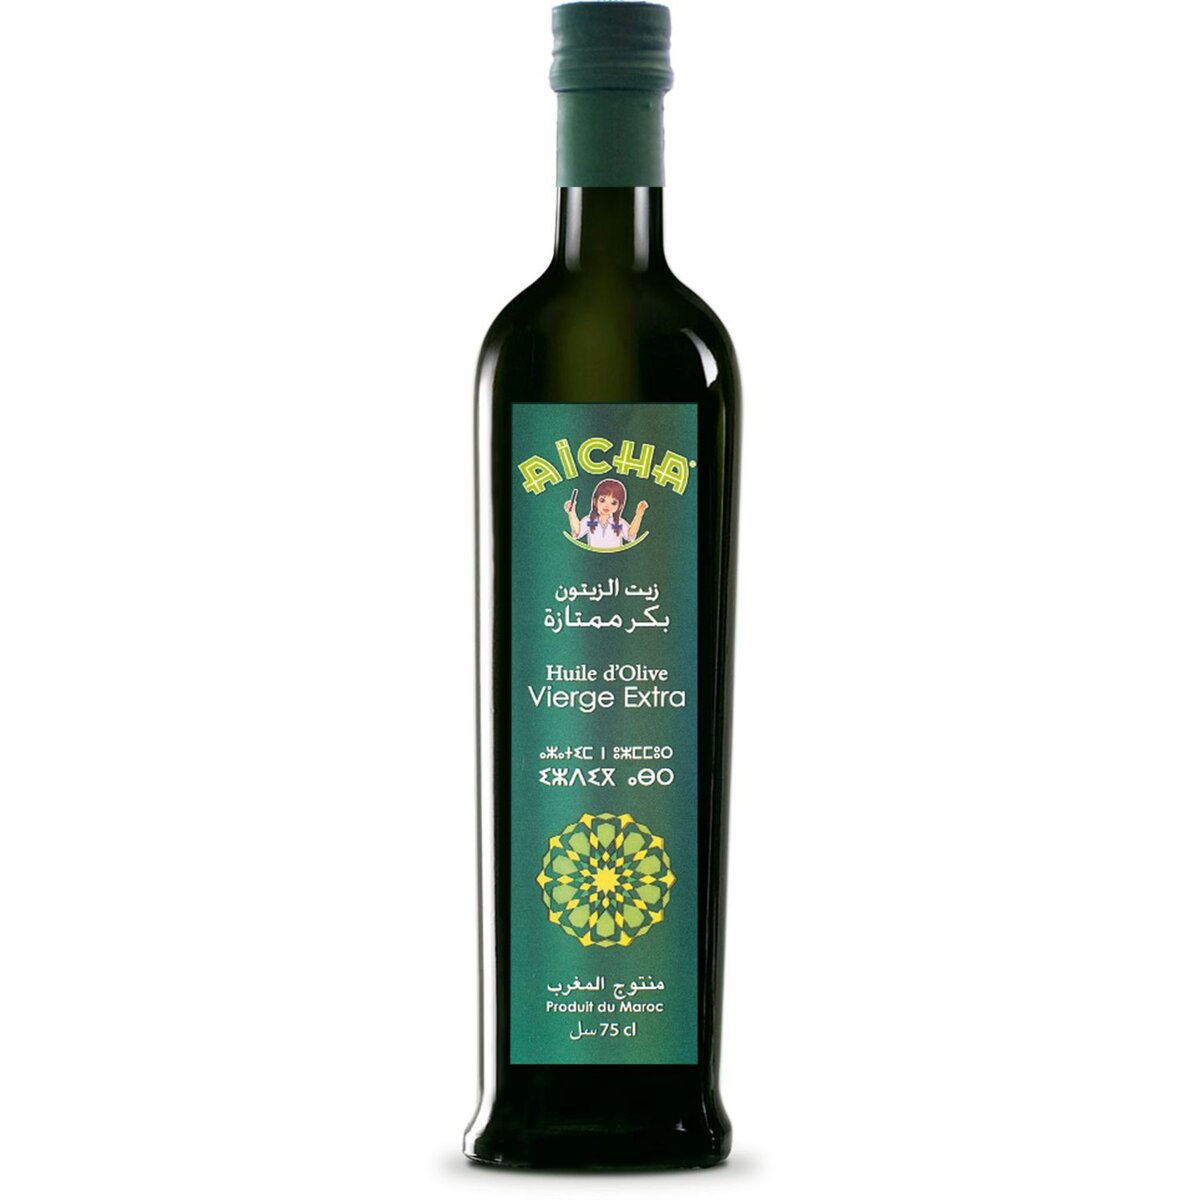 AICHA Huile d'olive vierge extra 75cl